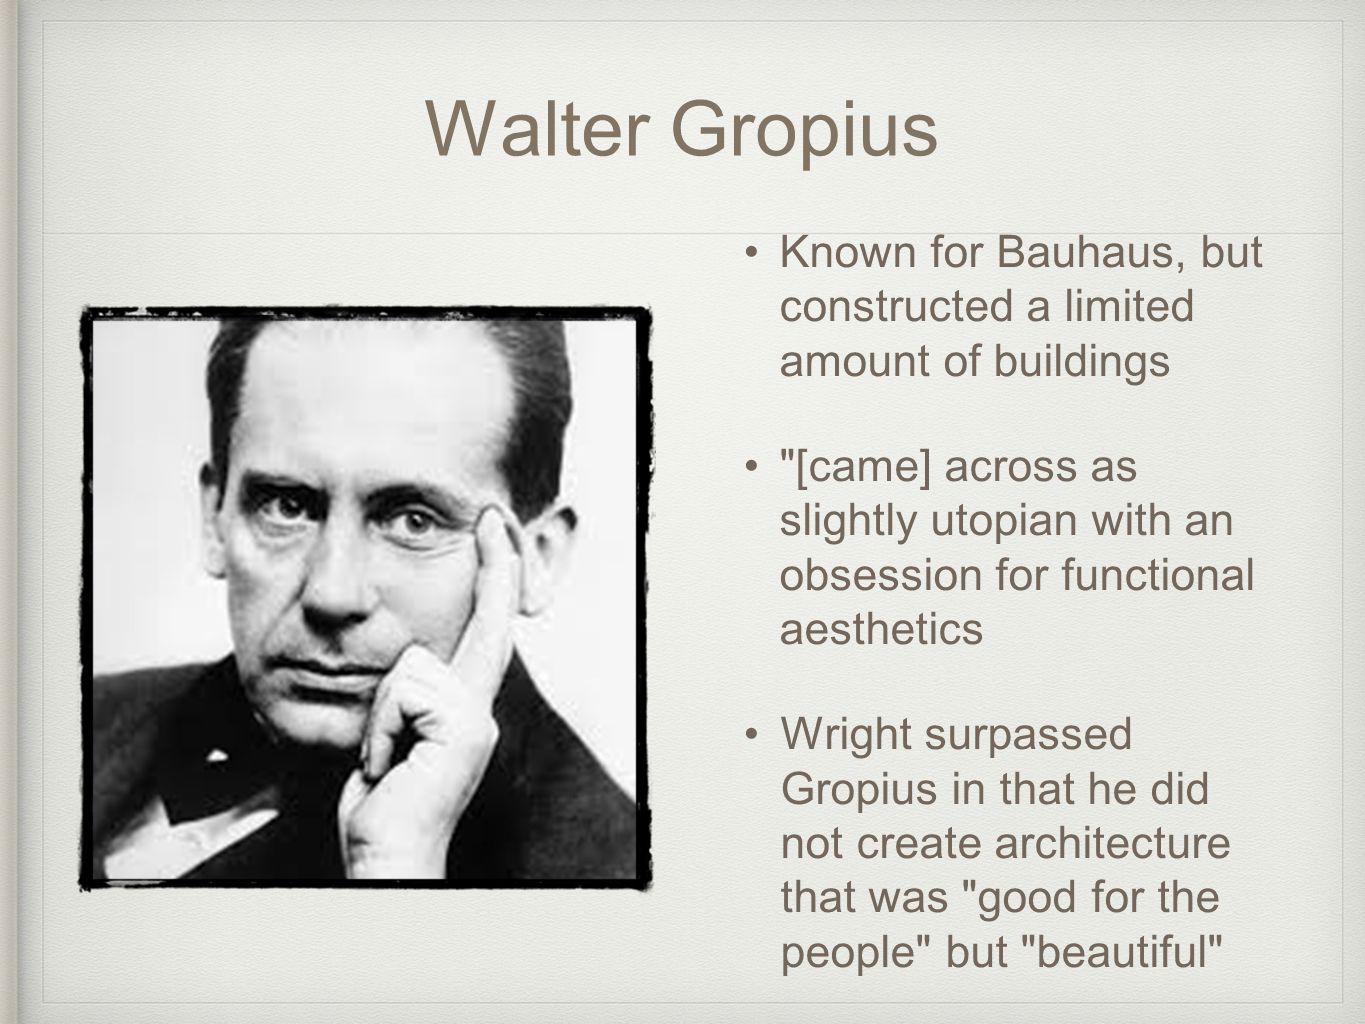 Walter Gropius Known for Bauhaus, but constructed a limited amount of buildings.